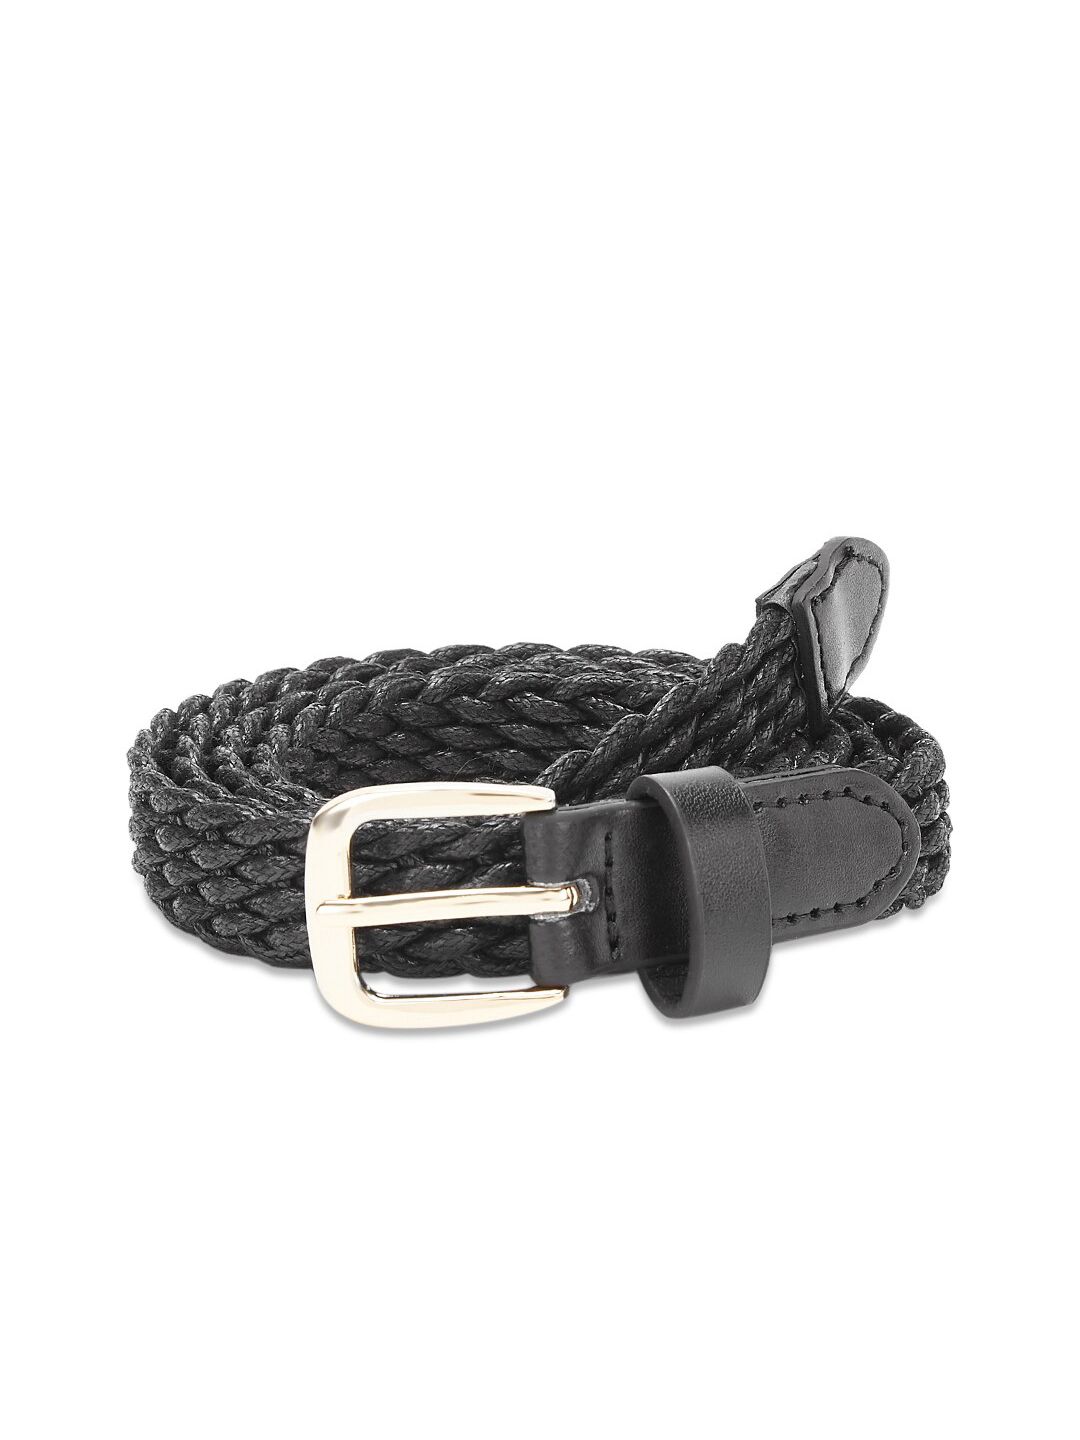 Forever Glam by Pantaloons Women Black Braided Belt Price in India